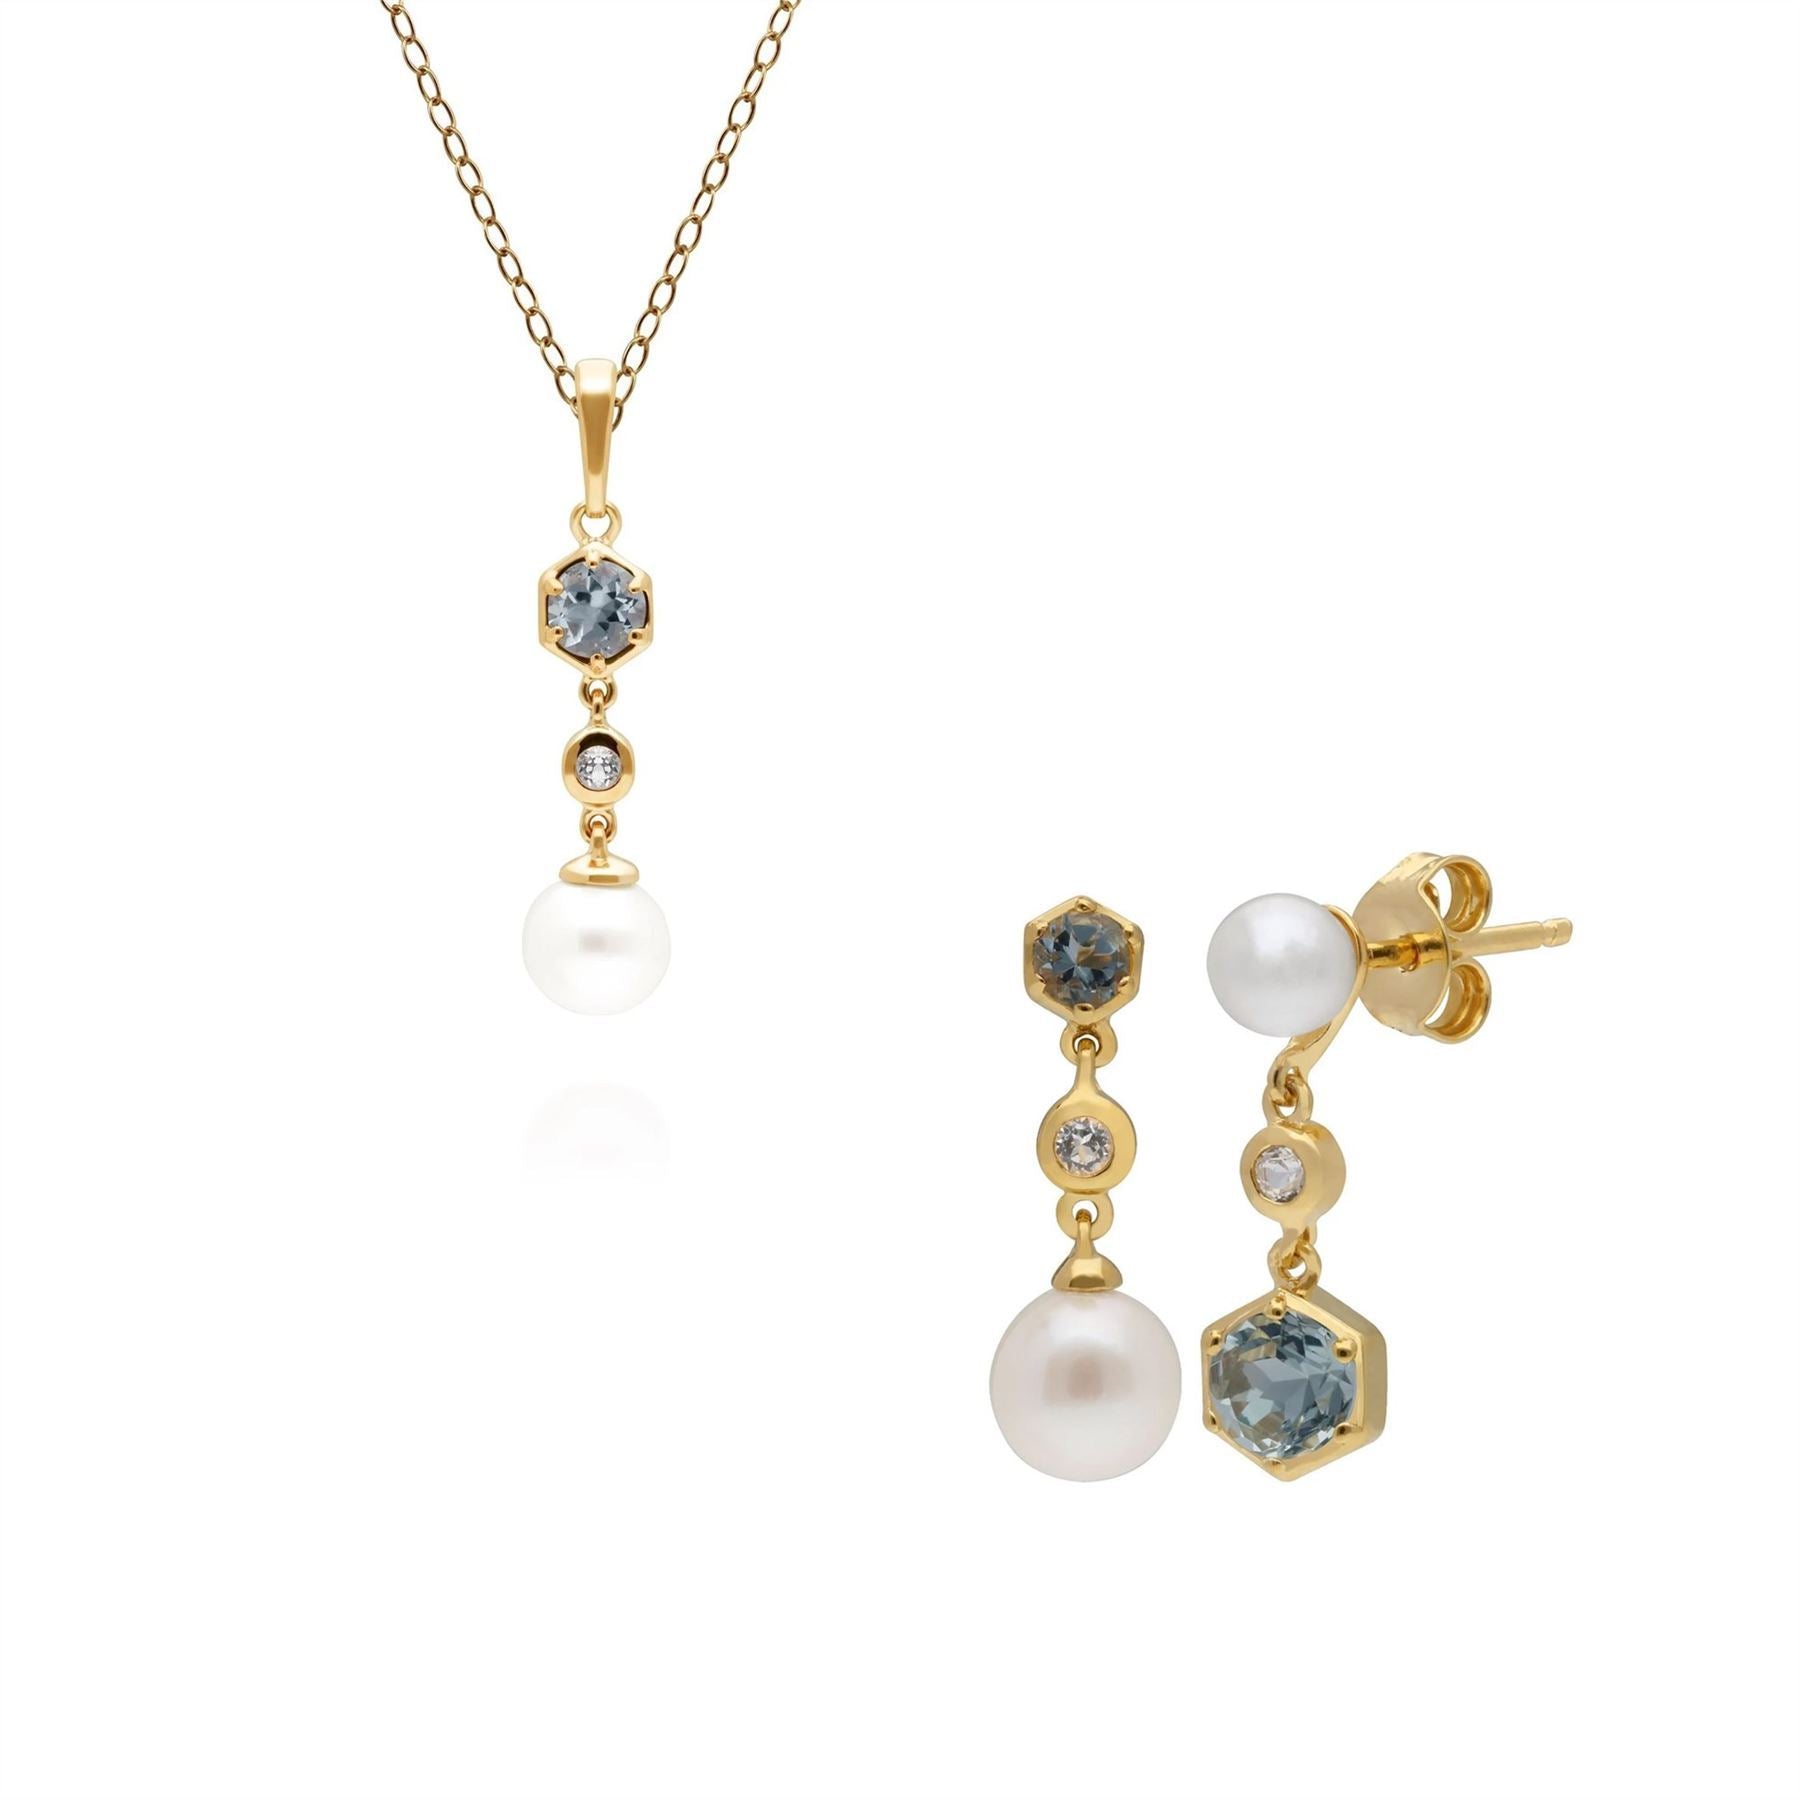 Modern Pearl, Topaz & Aquamarine Earring & Pendant Set in Gold Plated Sterling Silver